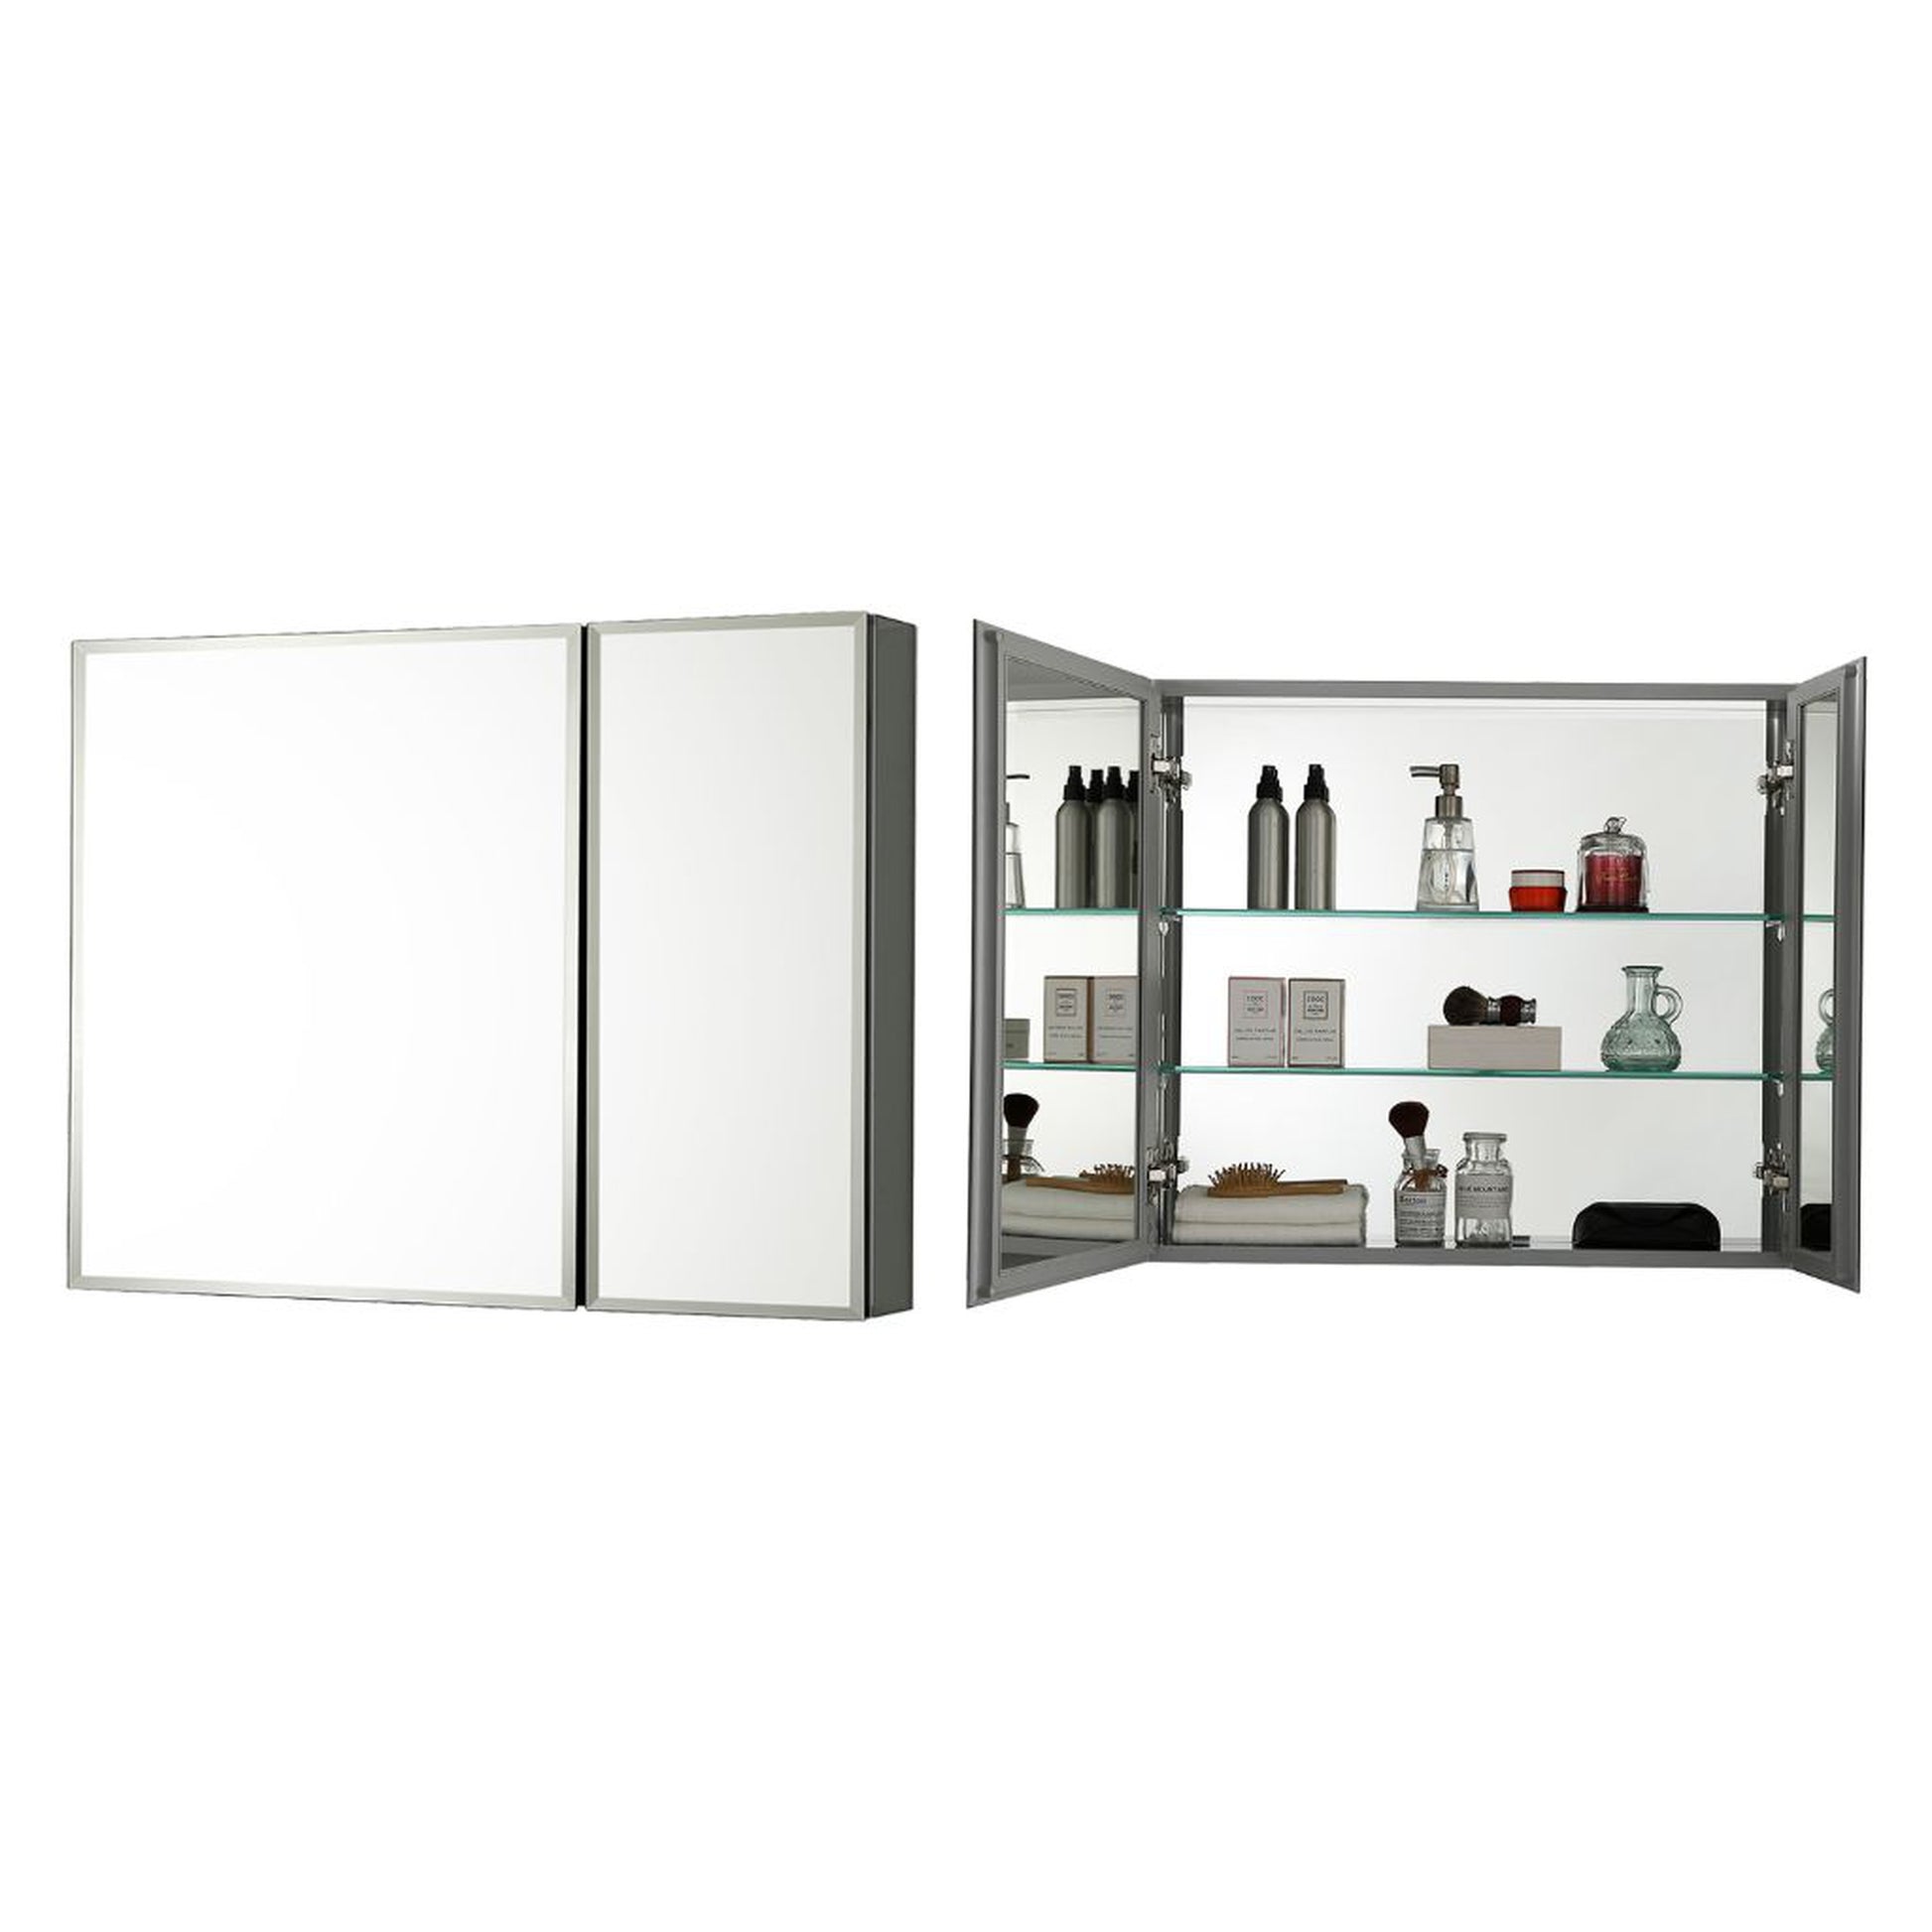 https://usbathstore.com/cdn/shop/products/Blossom-Mc8-30-x-26-Recessed-Or-Surface-Mount-2-Door-Aluminum-Medicine-Cabinet-With-Mirror-Adjustable-Hinges-And-Adjustable-Glass-Shelves.jpg?v=1675207964&width=1946